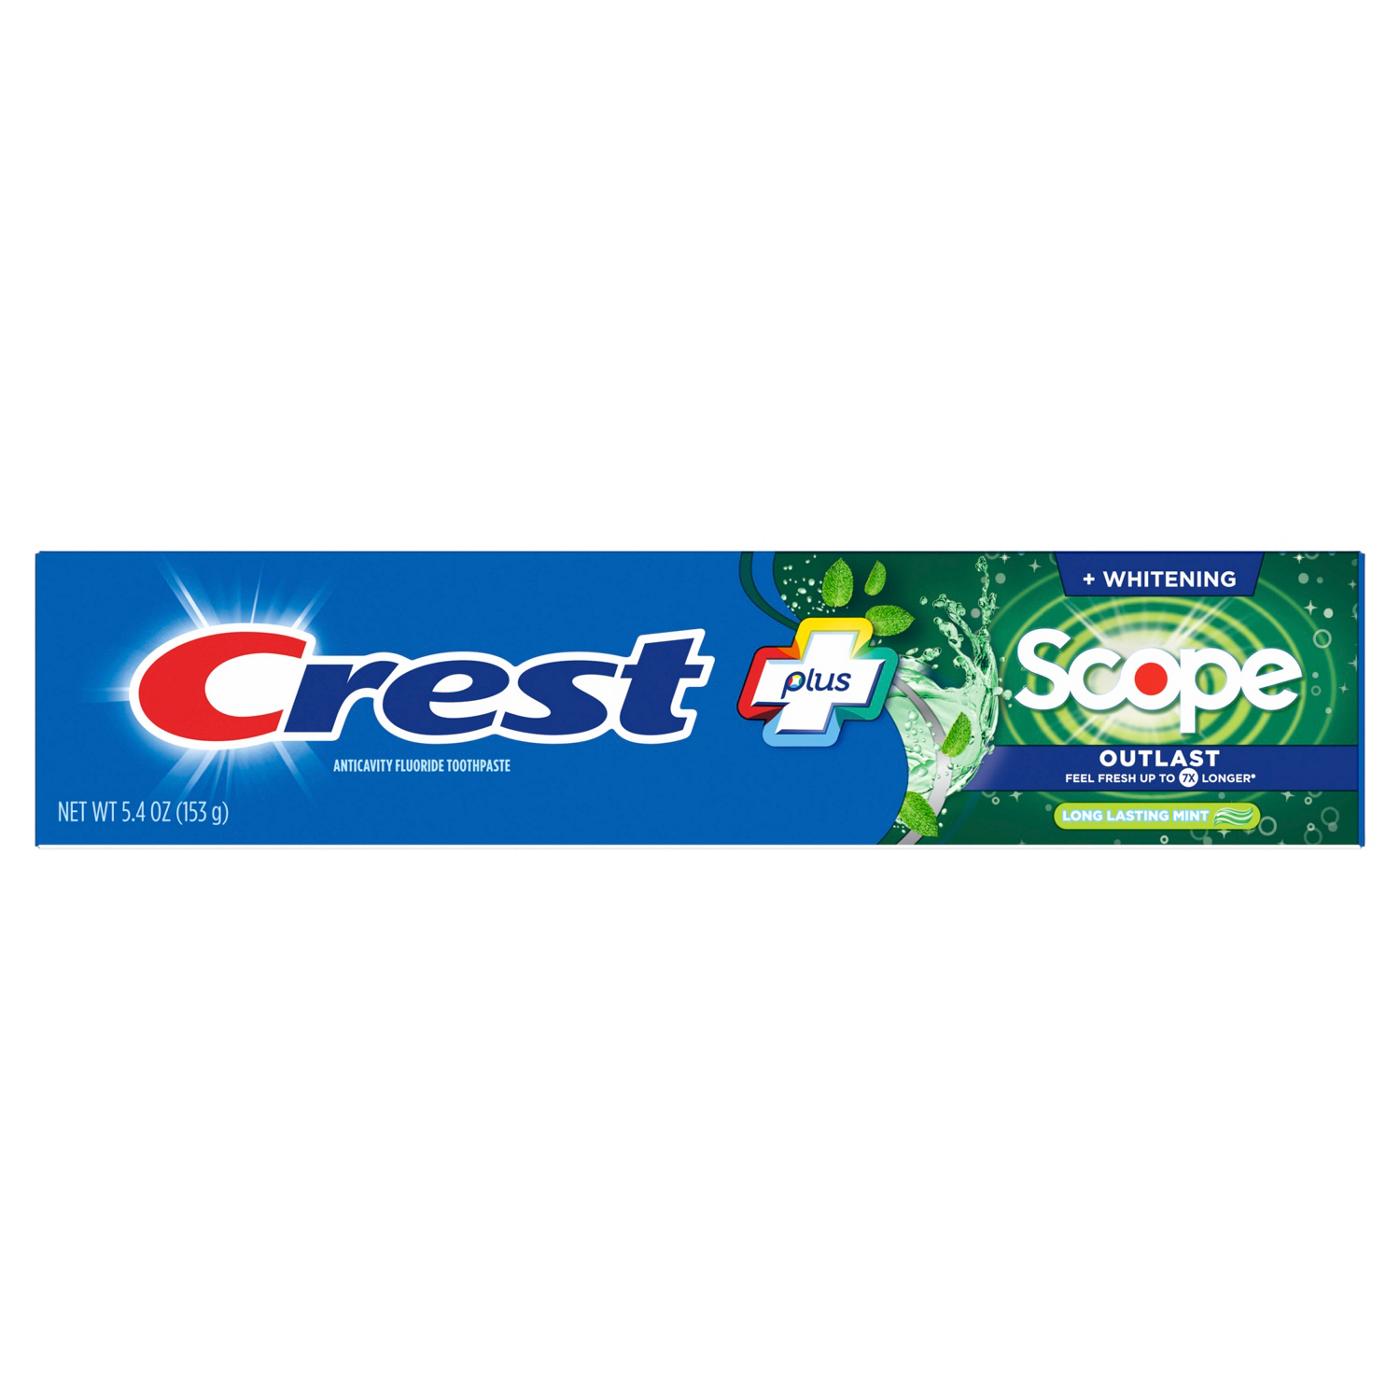 Crest Complete + Scope Outlast Whitening Toothpaste - Long Lasting Mint; image 1 of 7